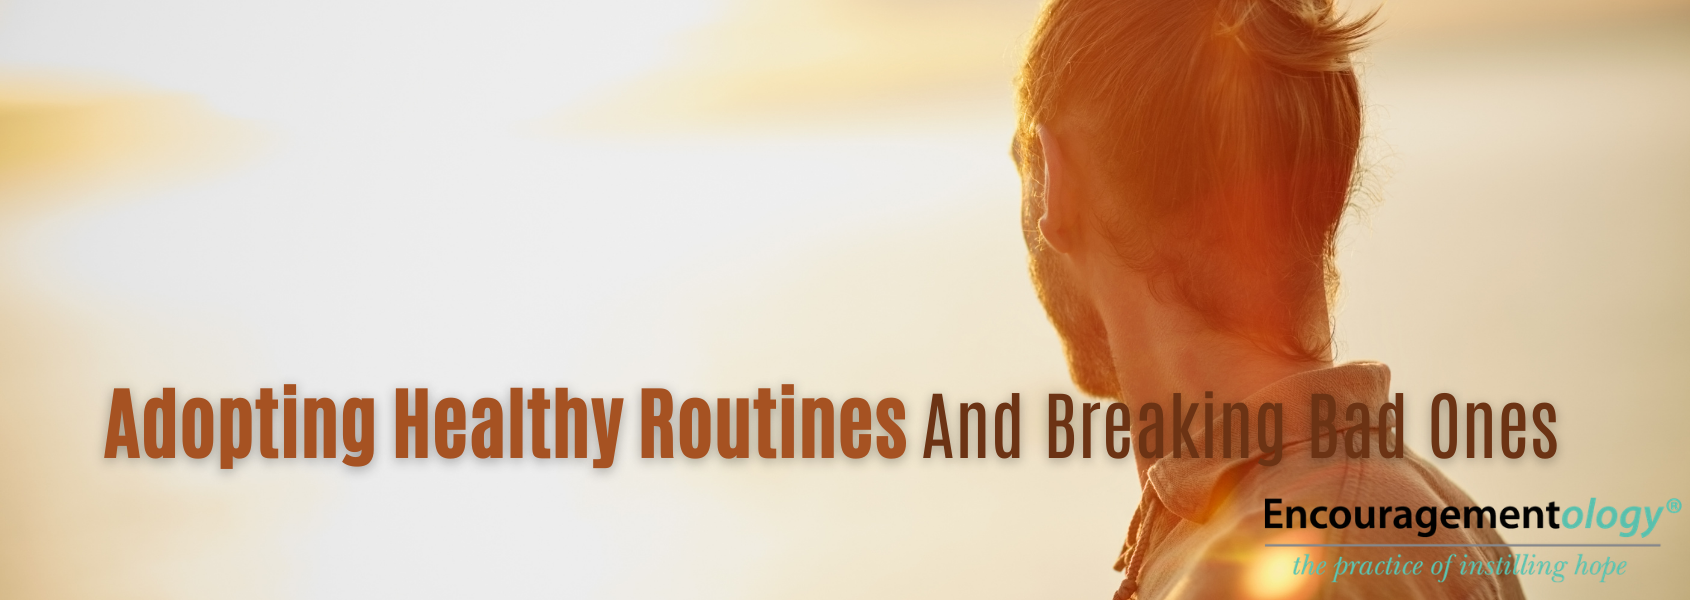 Adopting Healthy Routines and Breaking Bad ones